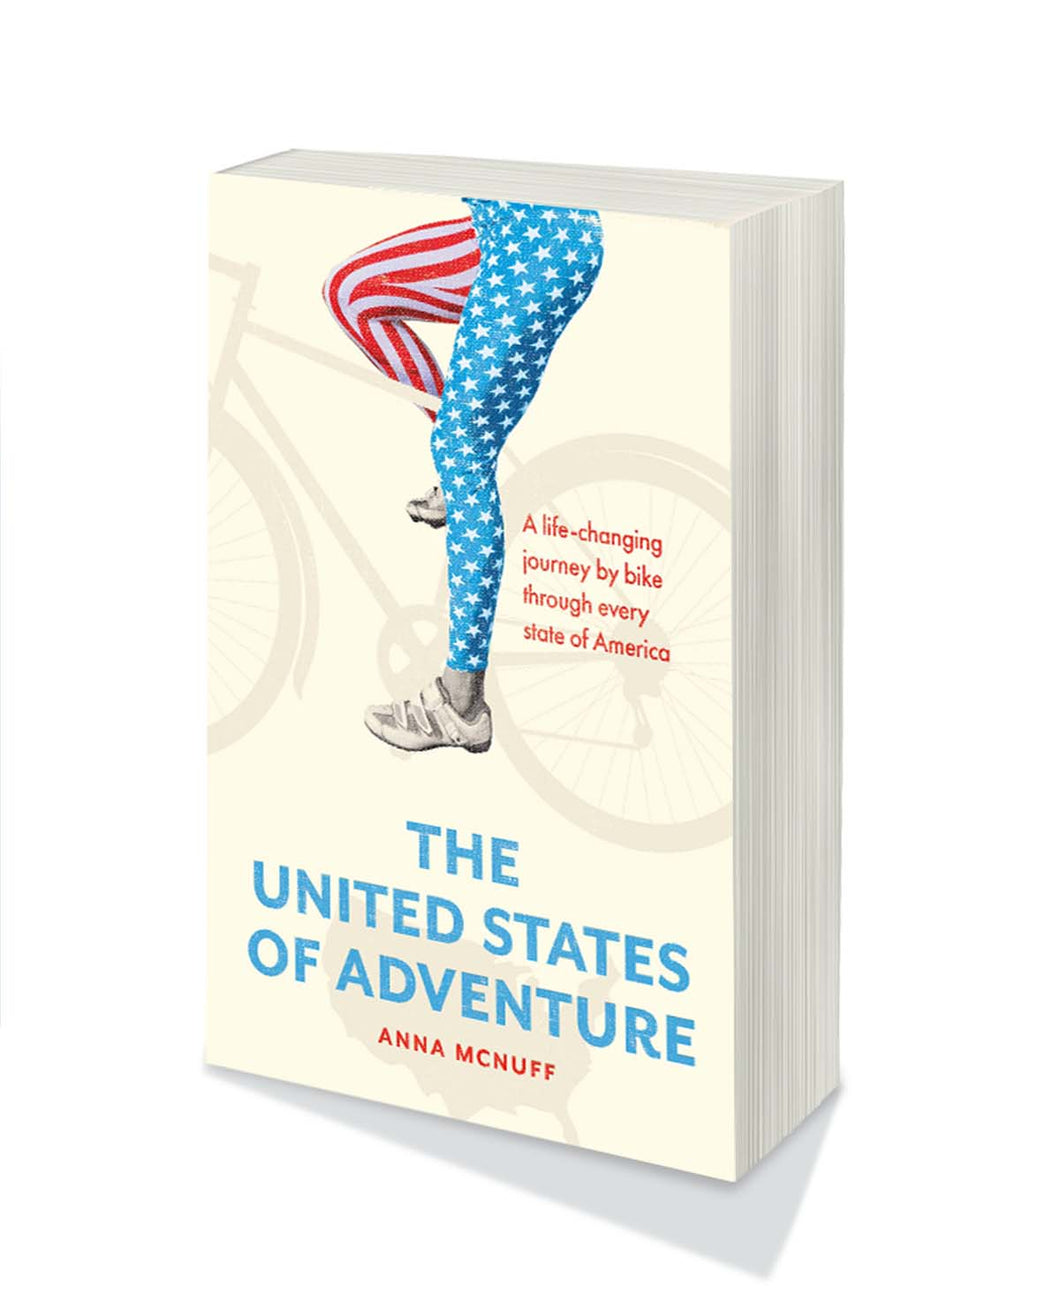 The United States of Adventure (Paperback): A life-changing journey by bike through every state of America